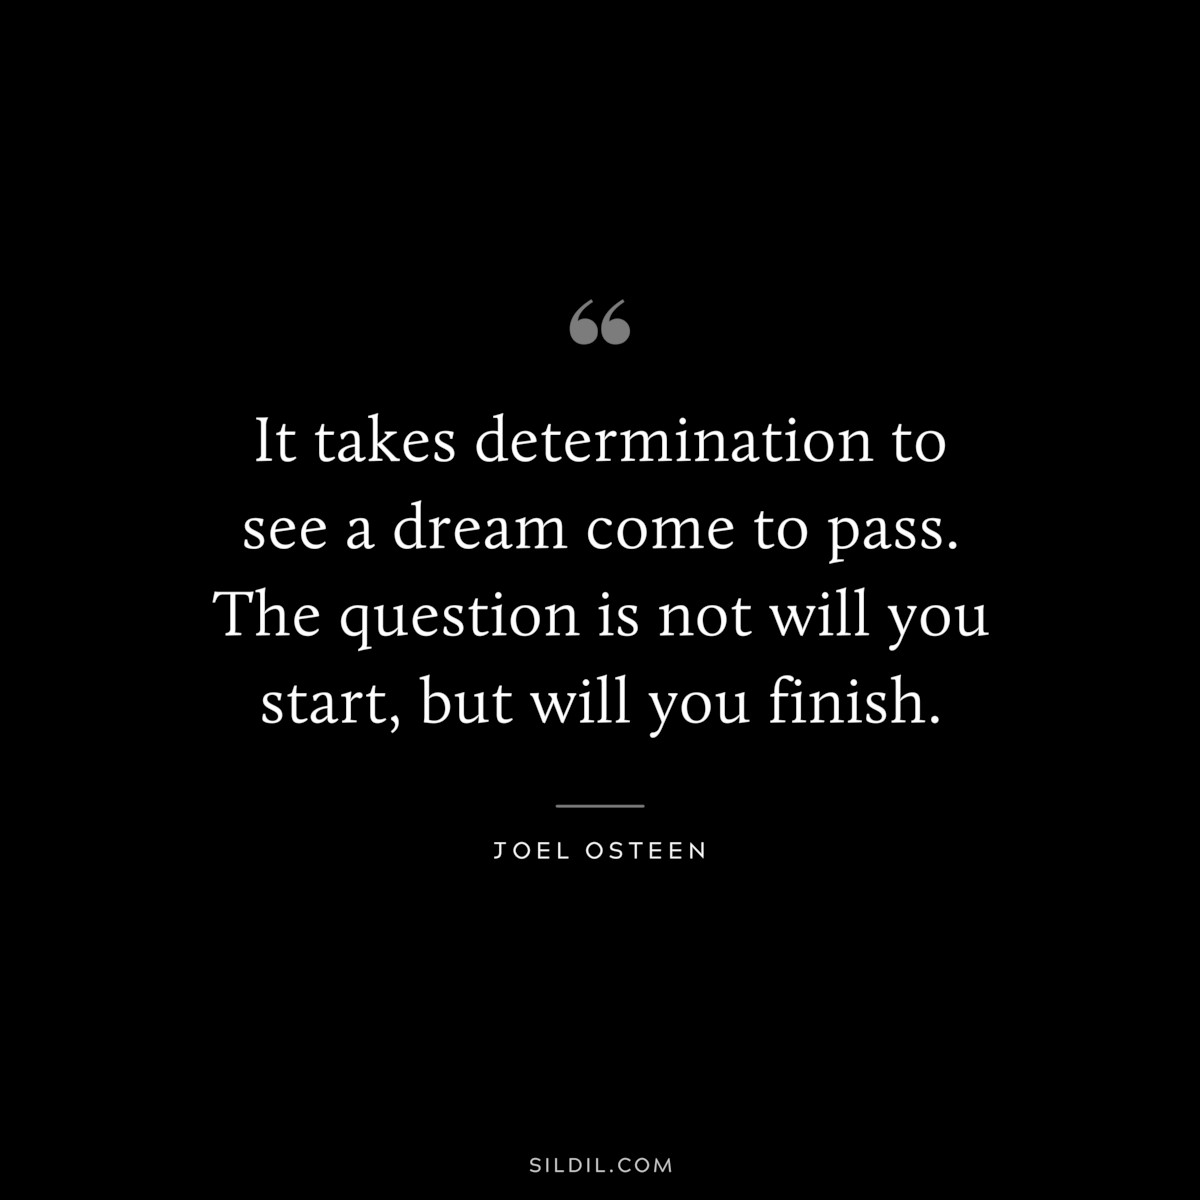 It takes determination to see a dream come to pass. The question is not will you start, but will you finish. ― Joel Osteen